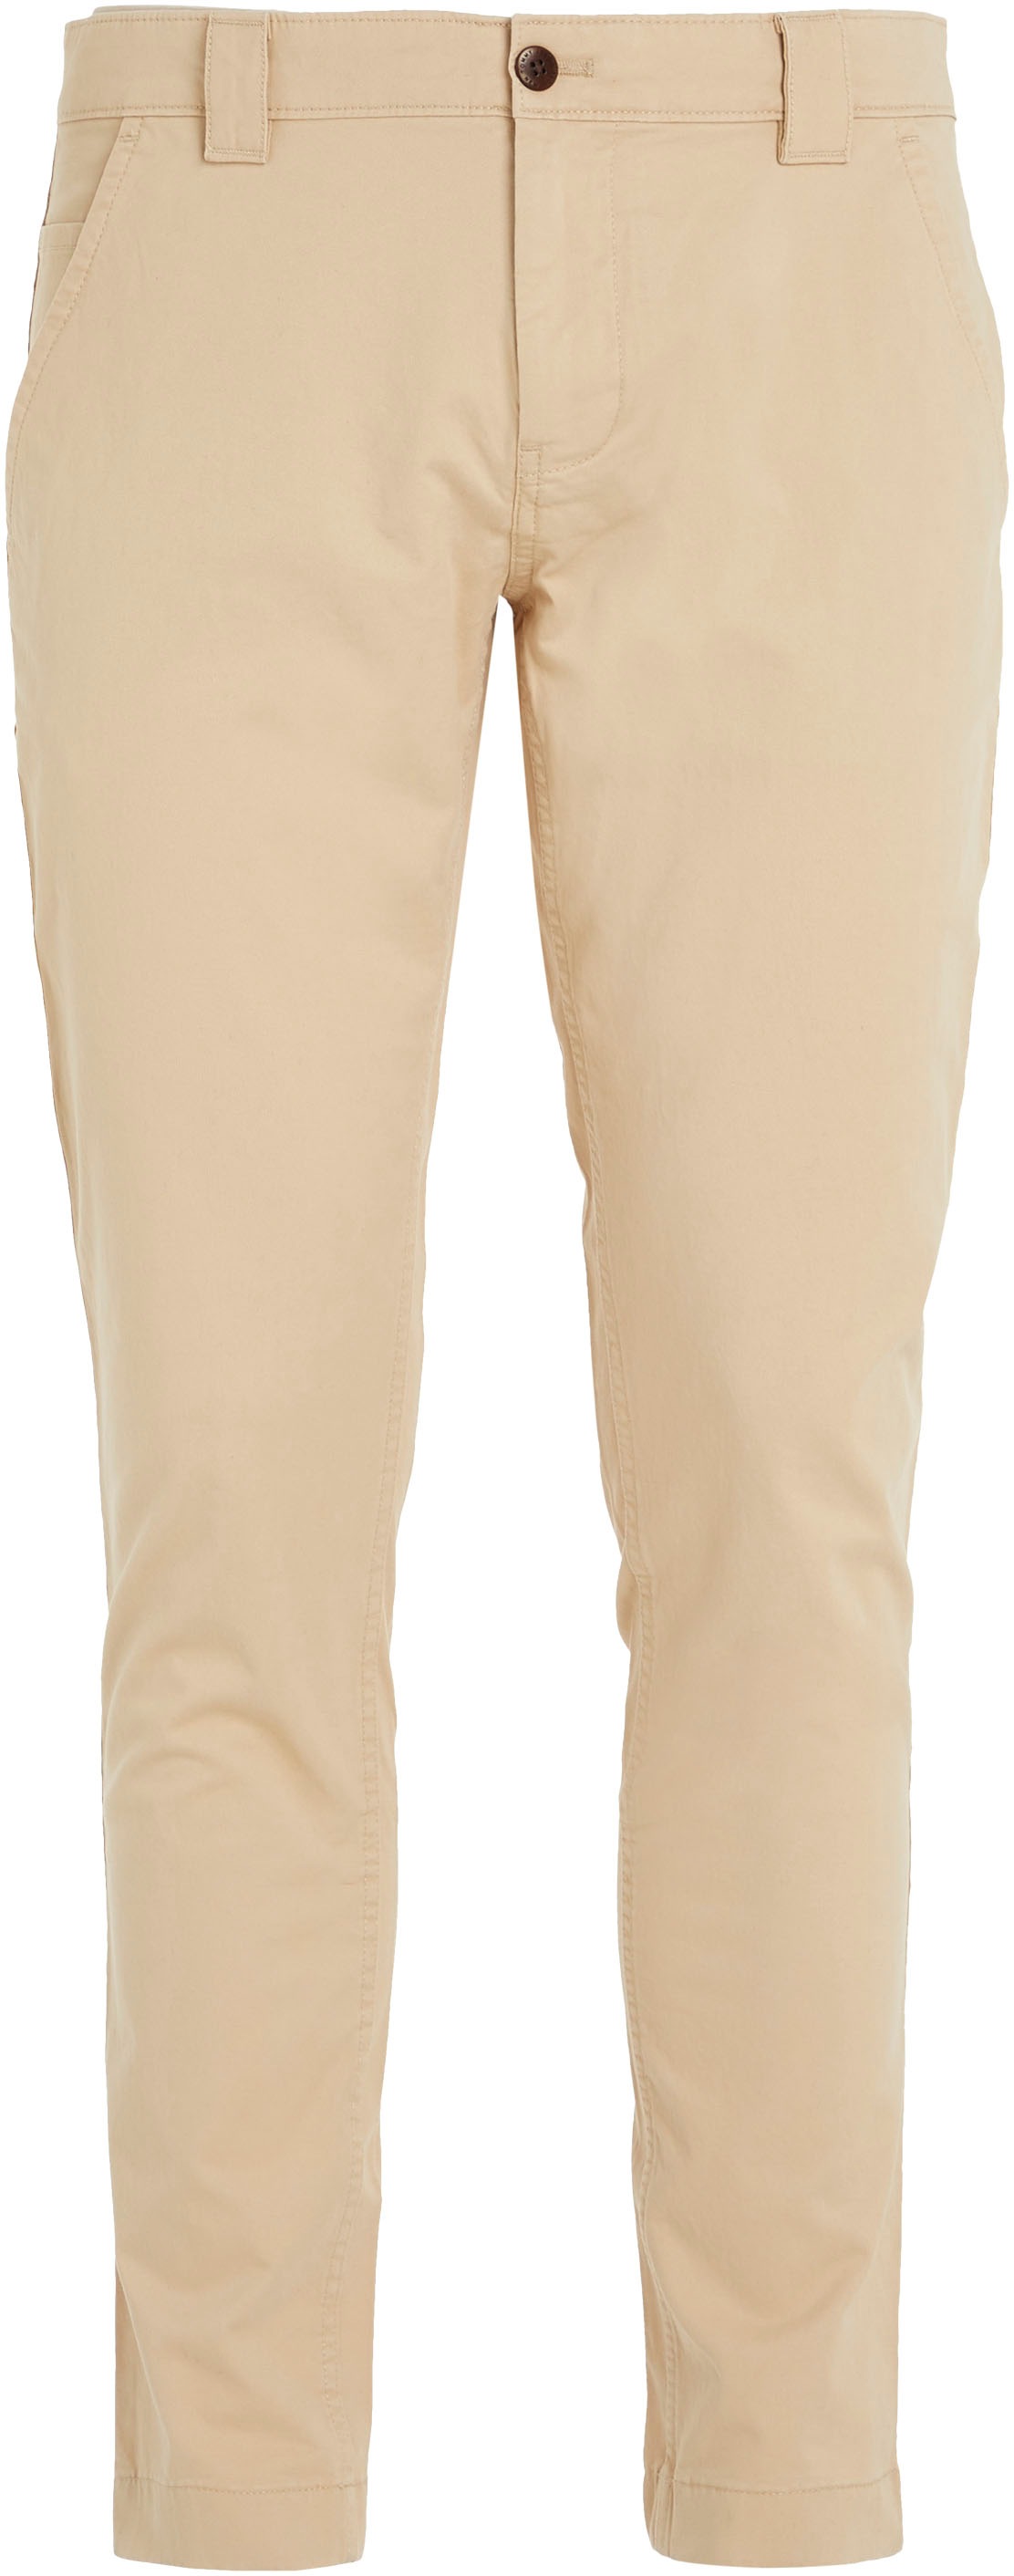 Tommy Jeans Chinohose »TJM SCANTON CHINO PANT«, mit Markenlabel online  shoppen bei OTTO